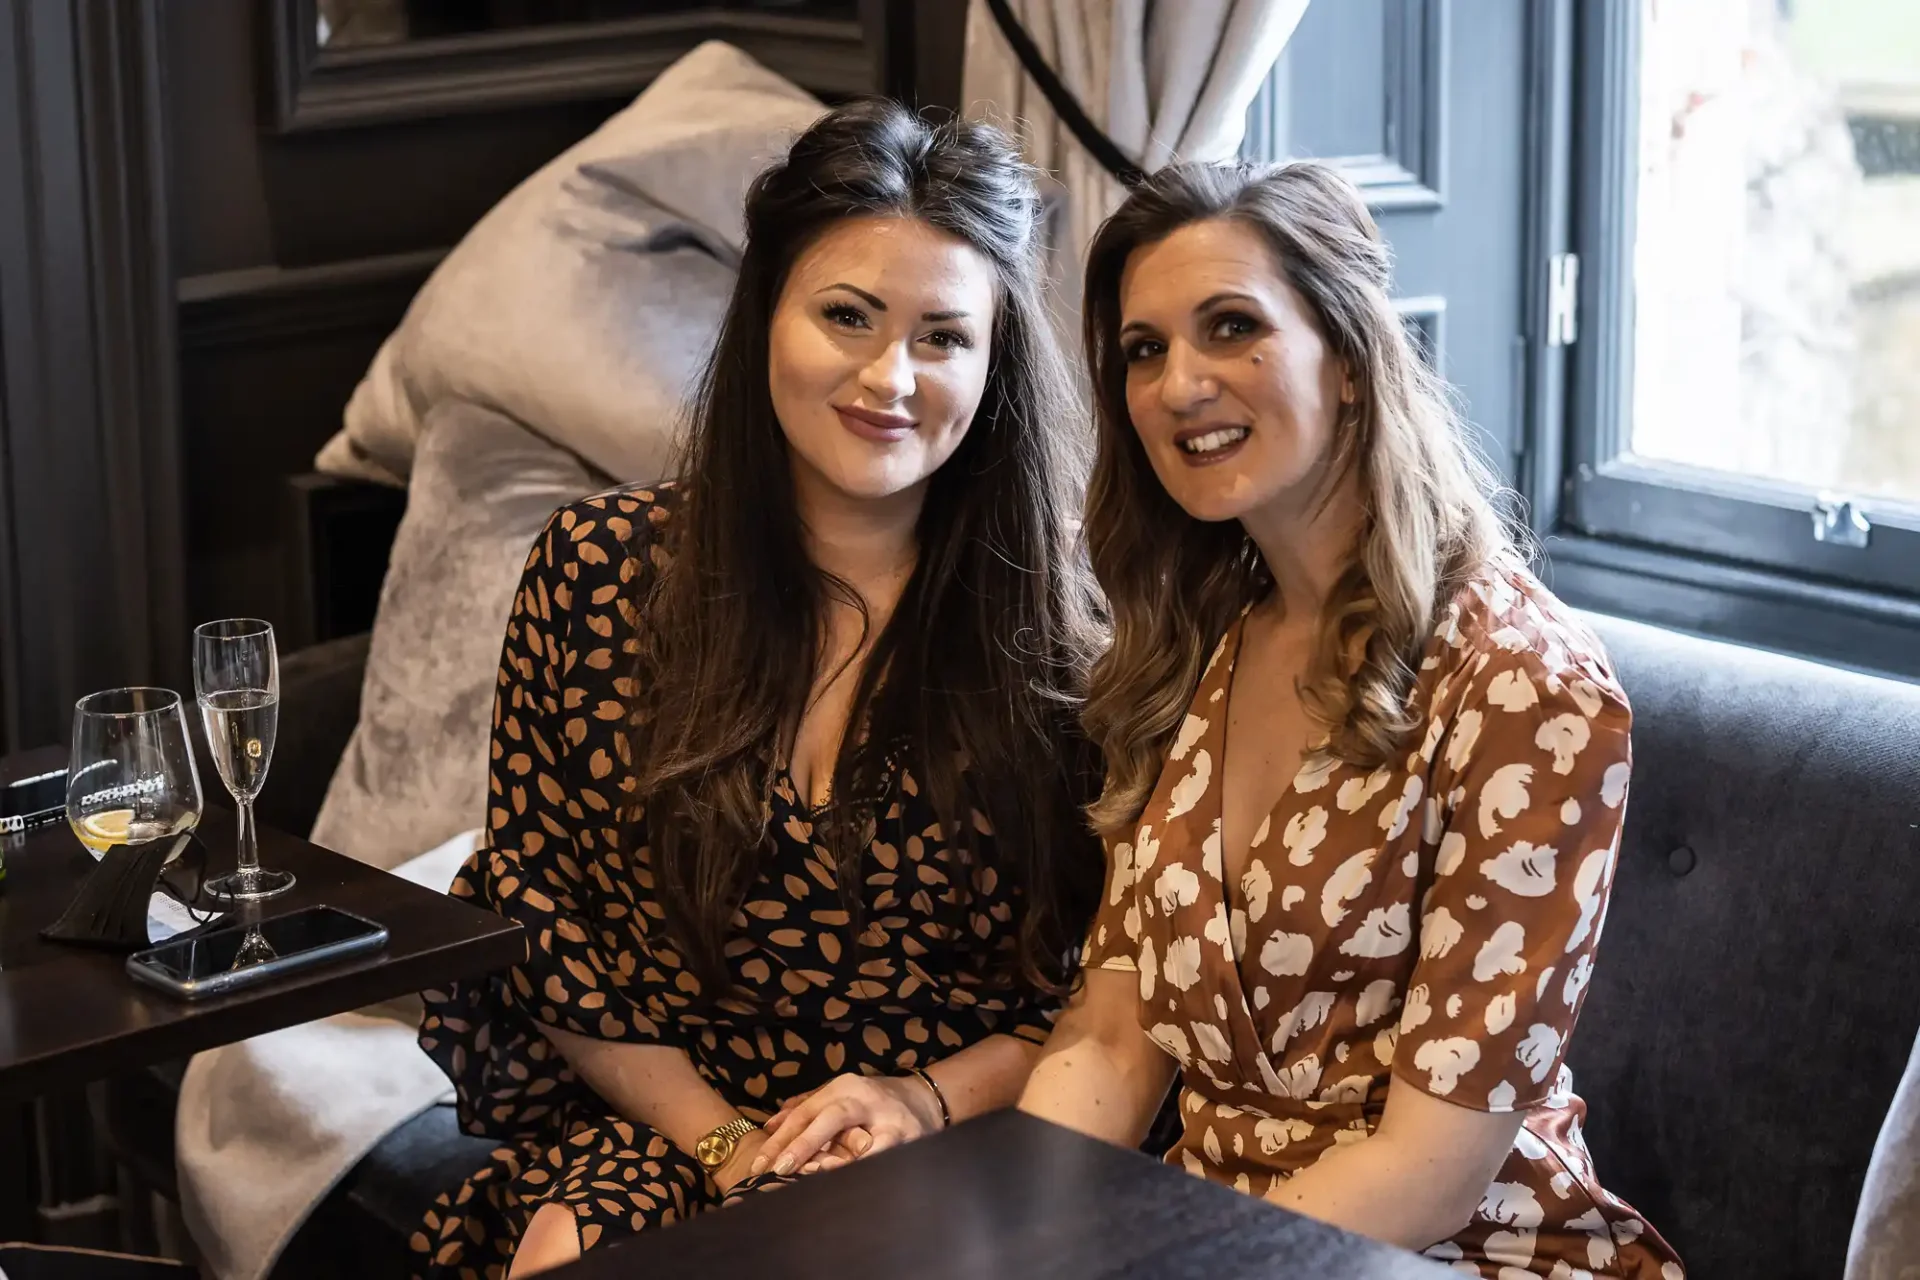 Two women in patterned dresses smiling at the camera while sitting with glasses of champagne in a cozy, dimly-lit lounge.